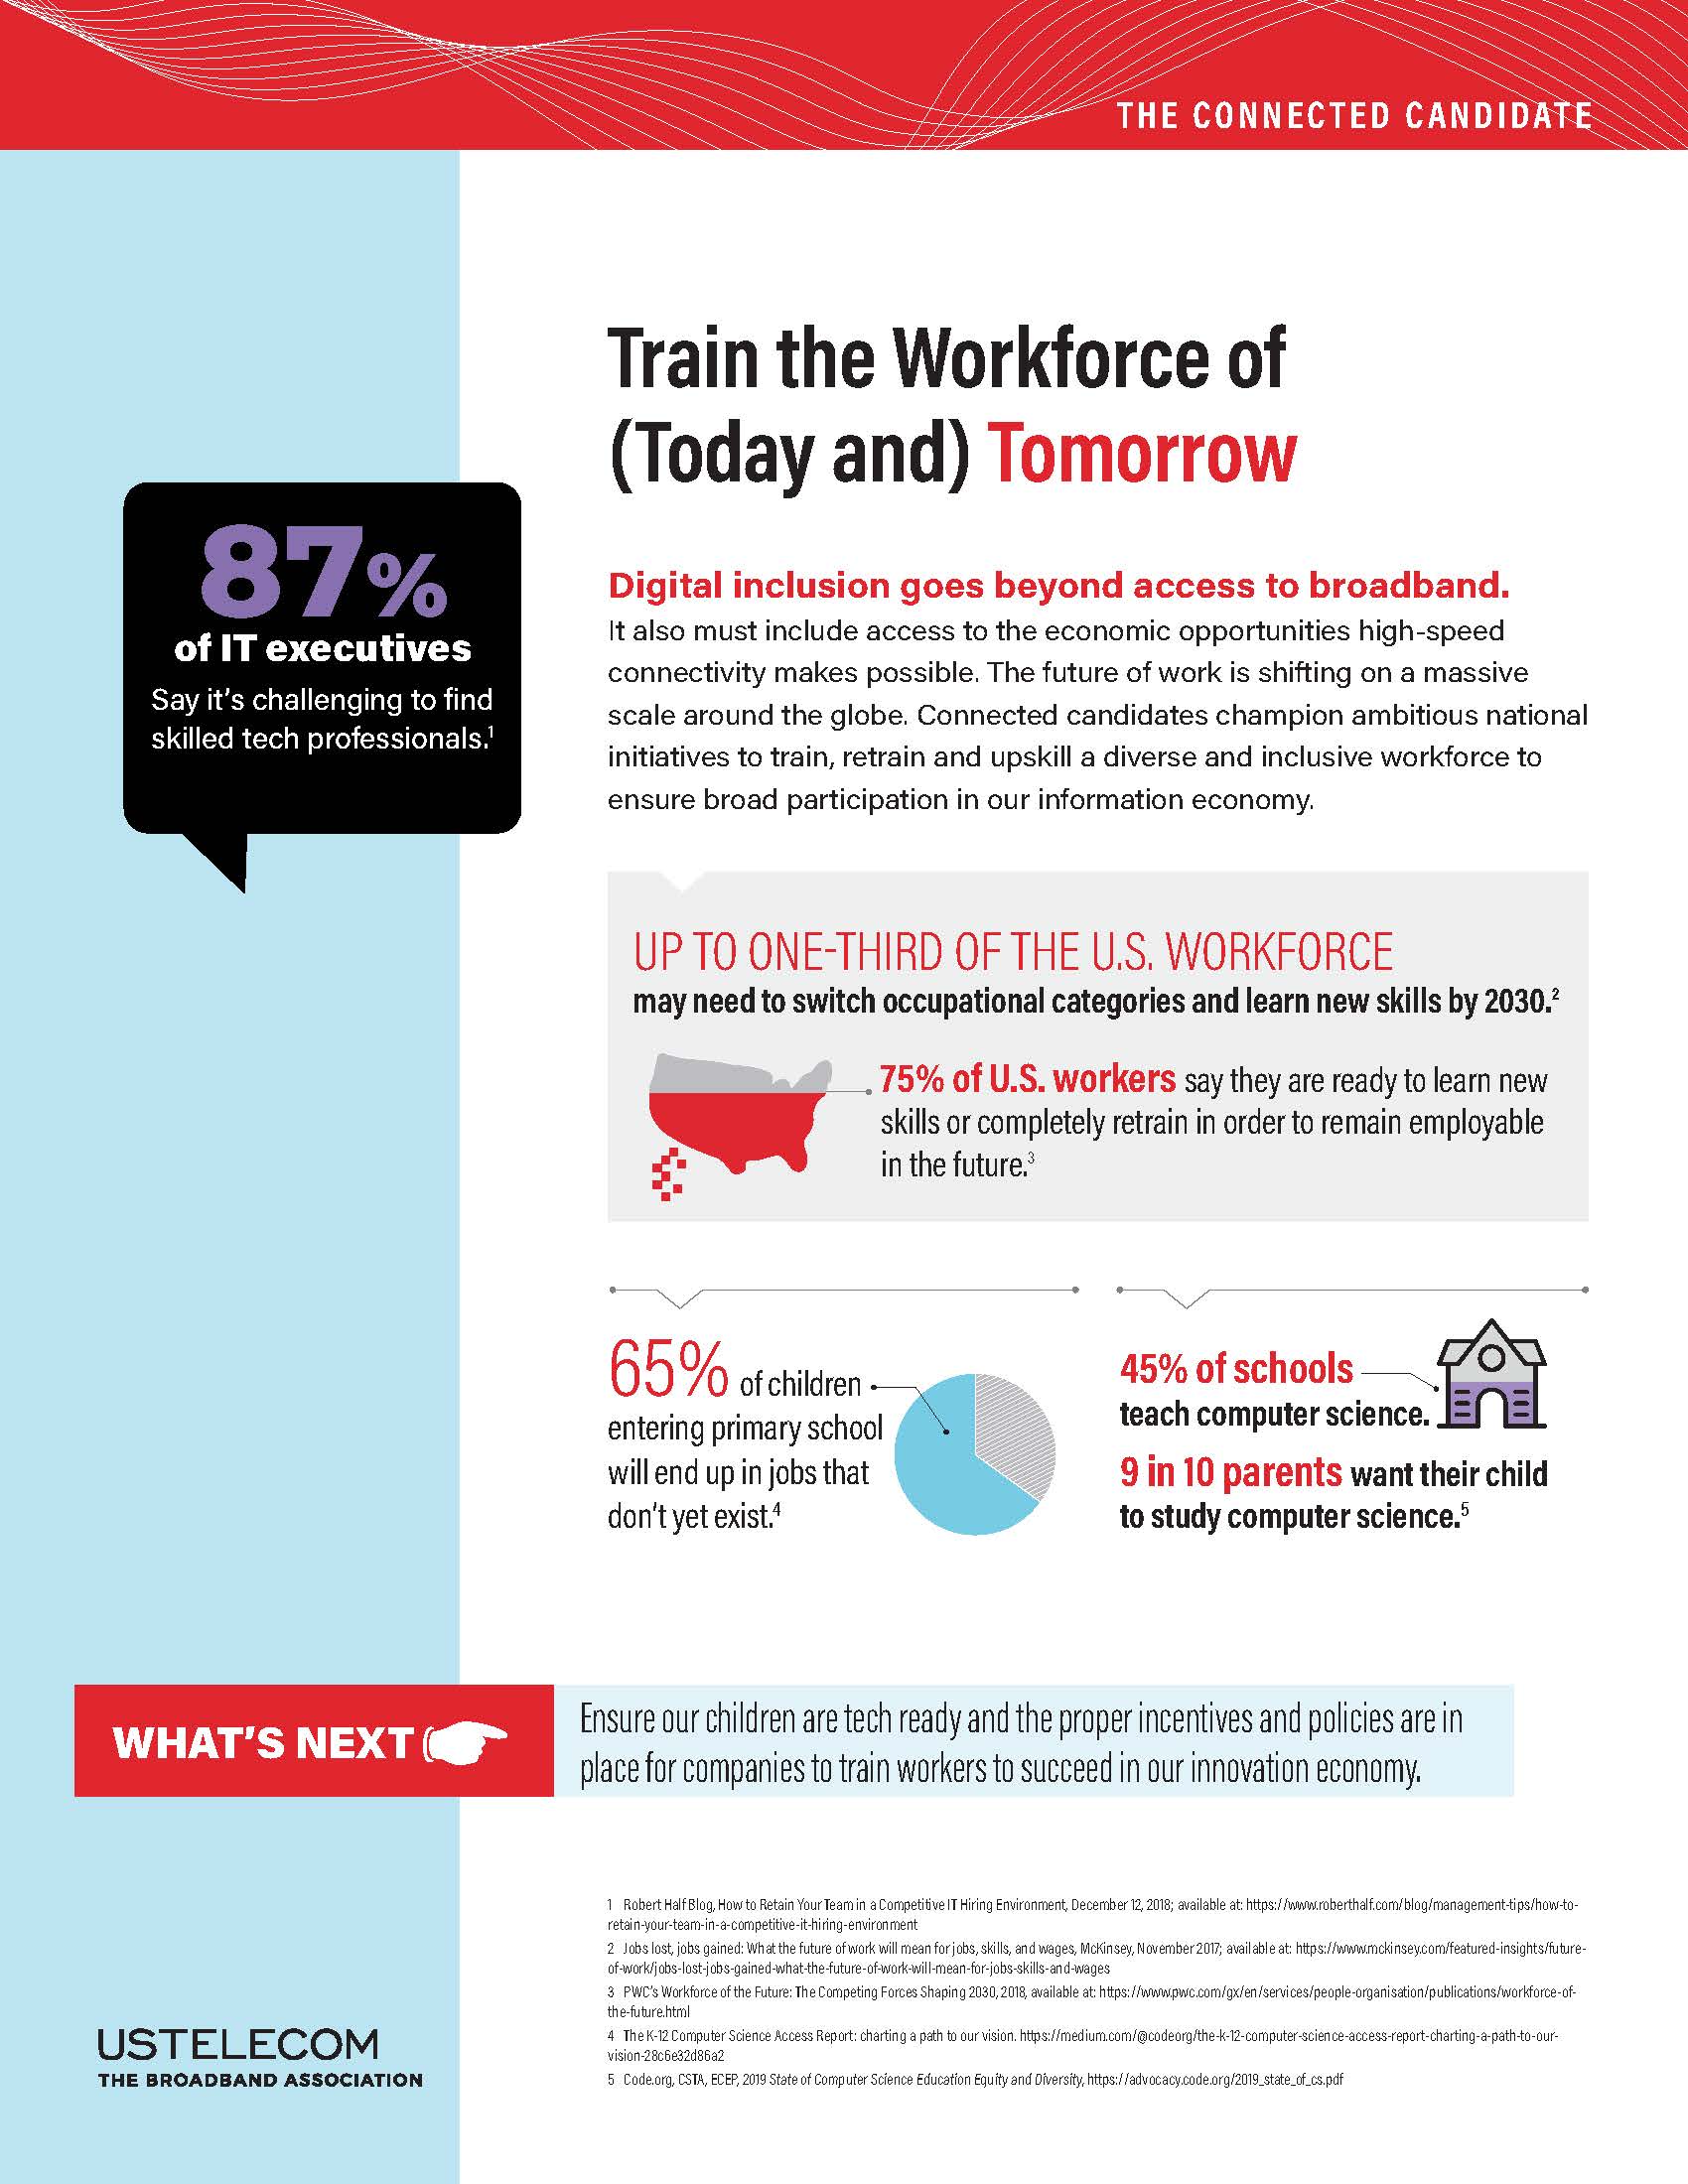 Roadmap To A Connected America: Train the Workforce of (Today and) Tomorrow